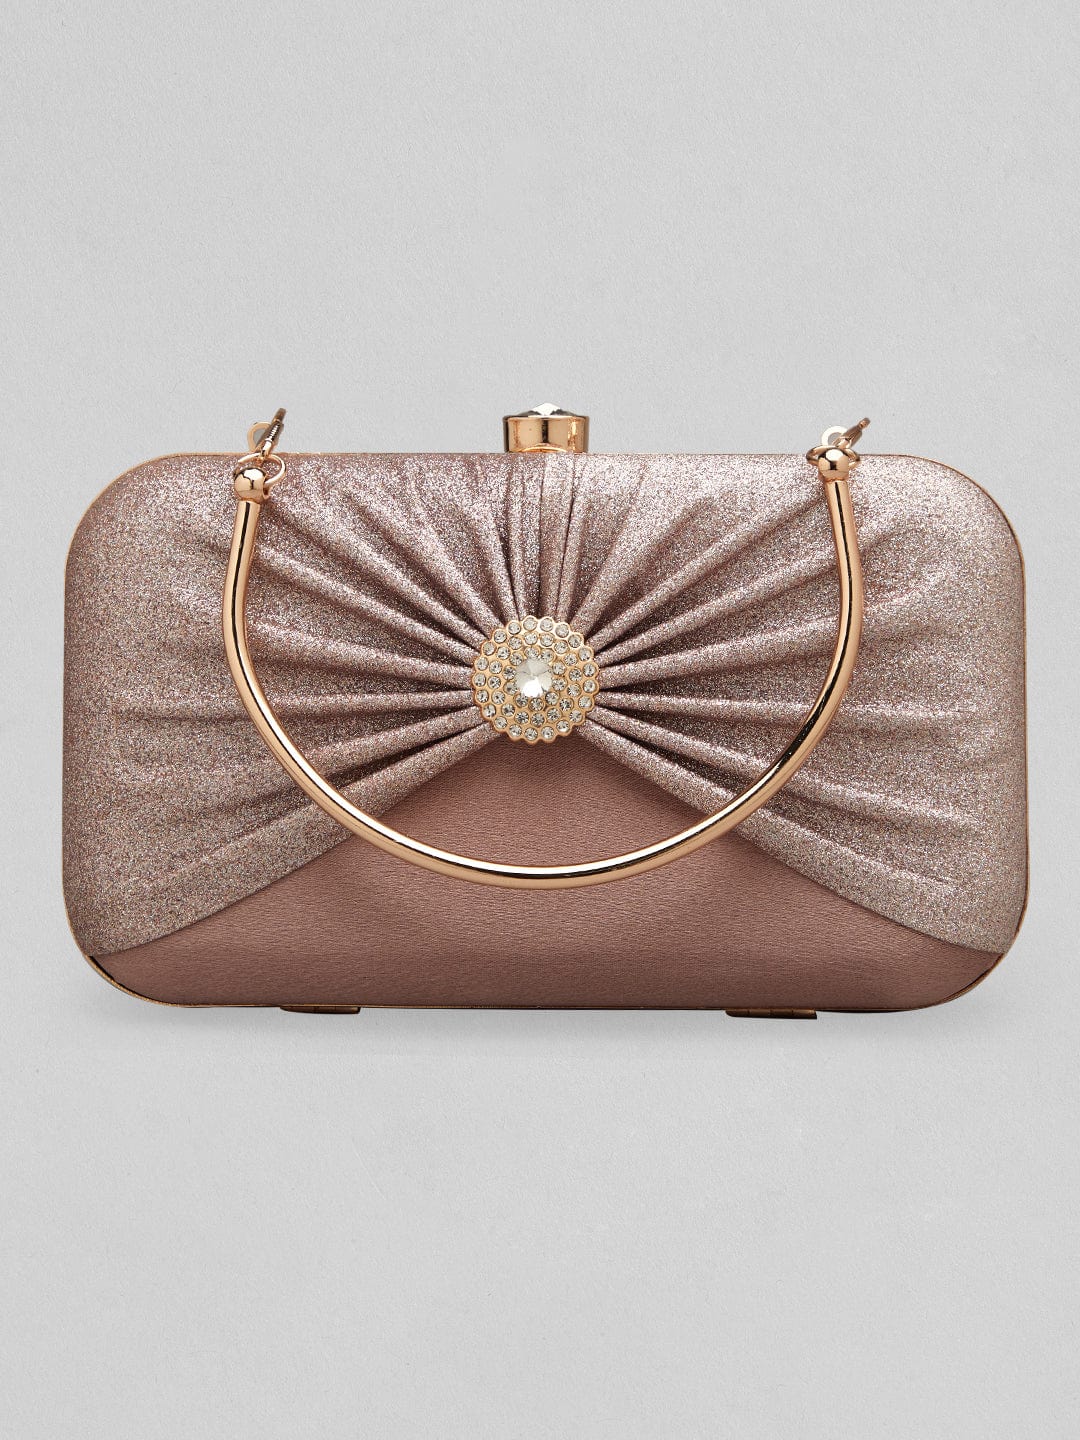 Rubans Dusky Pink Box Clutch Sling Bag With Glossy Texture And Studded Stone Design. Handbag & Wallet Accessories